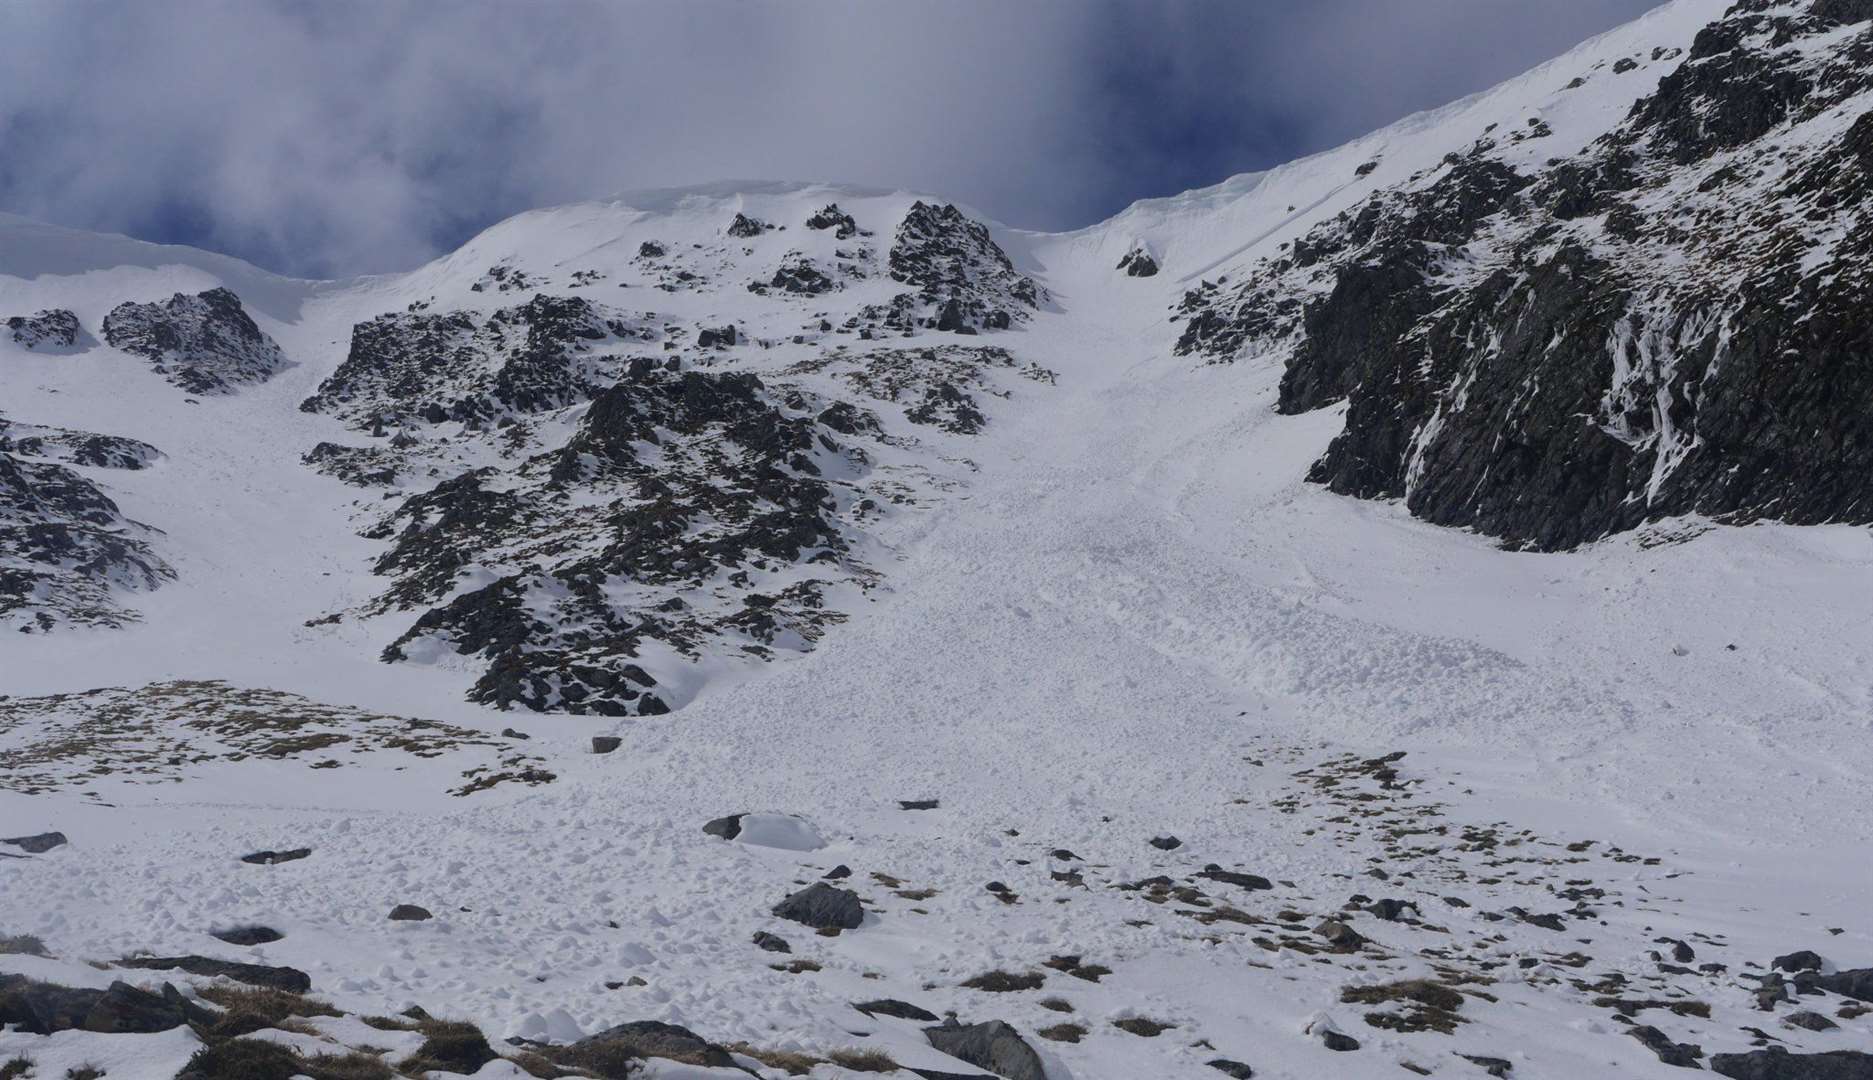 Fewer avalanches were recorded this winter.